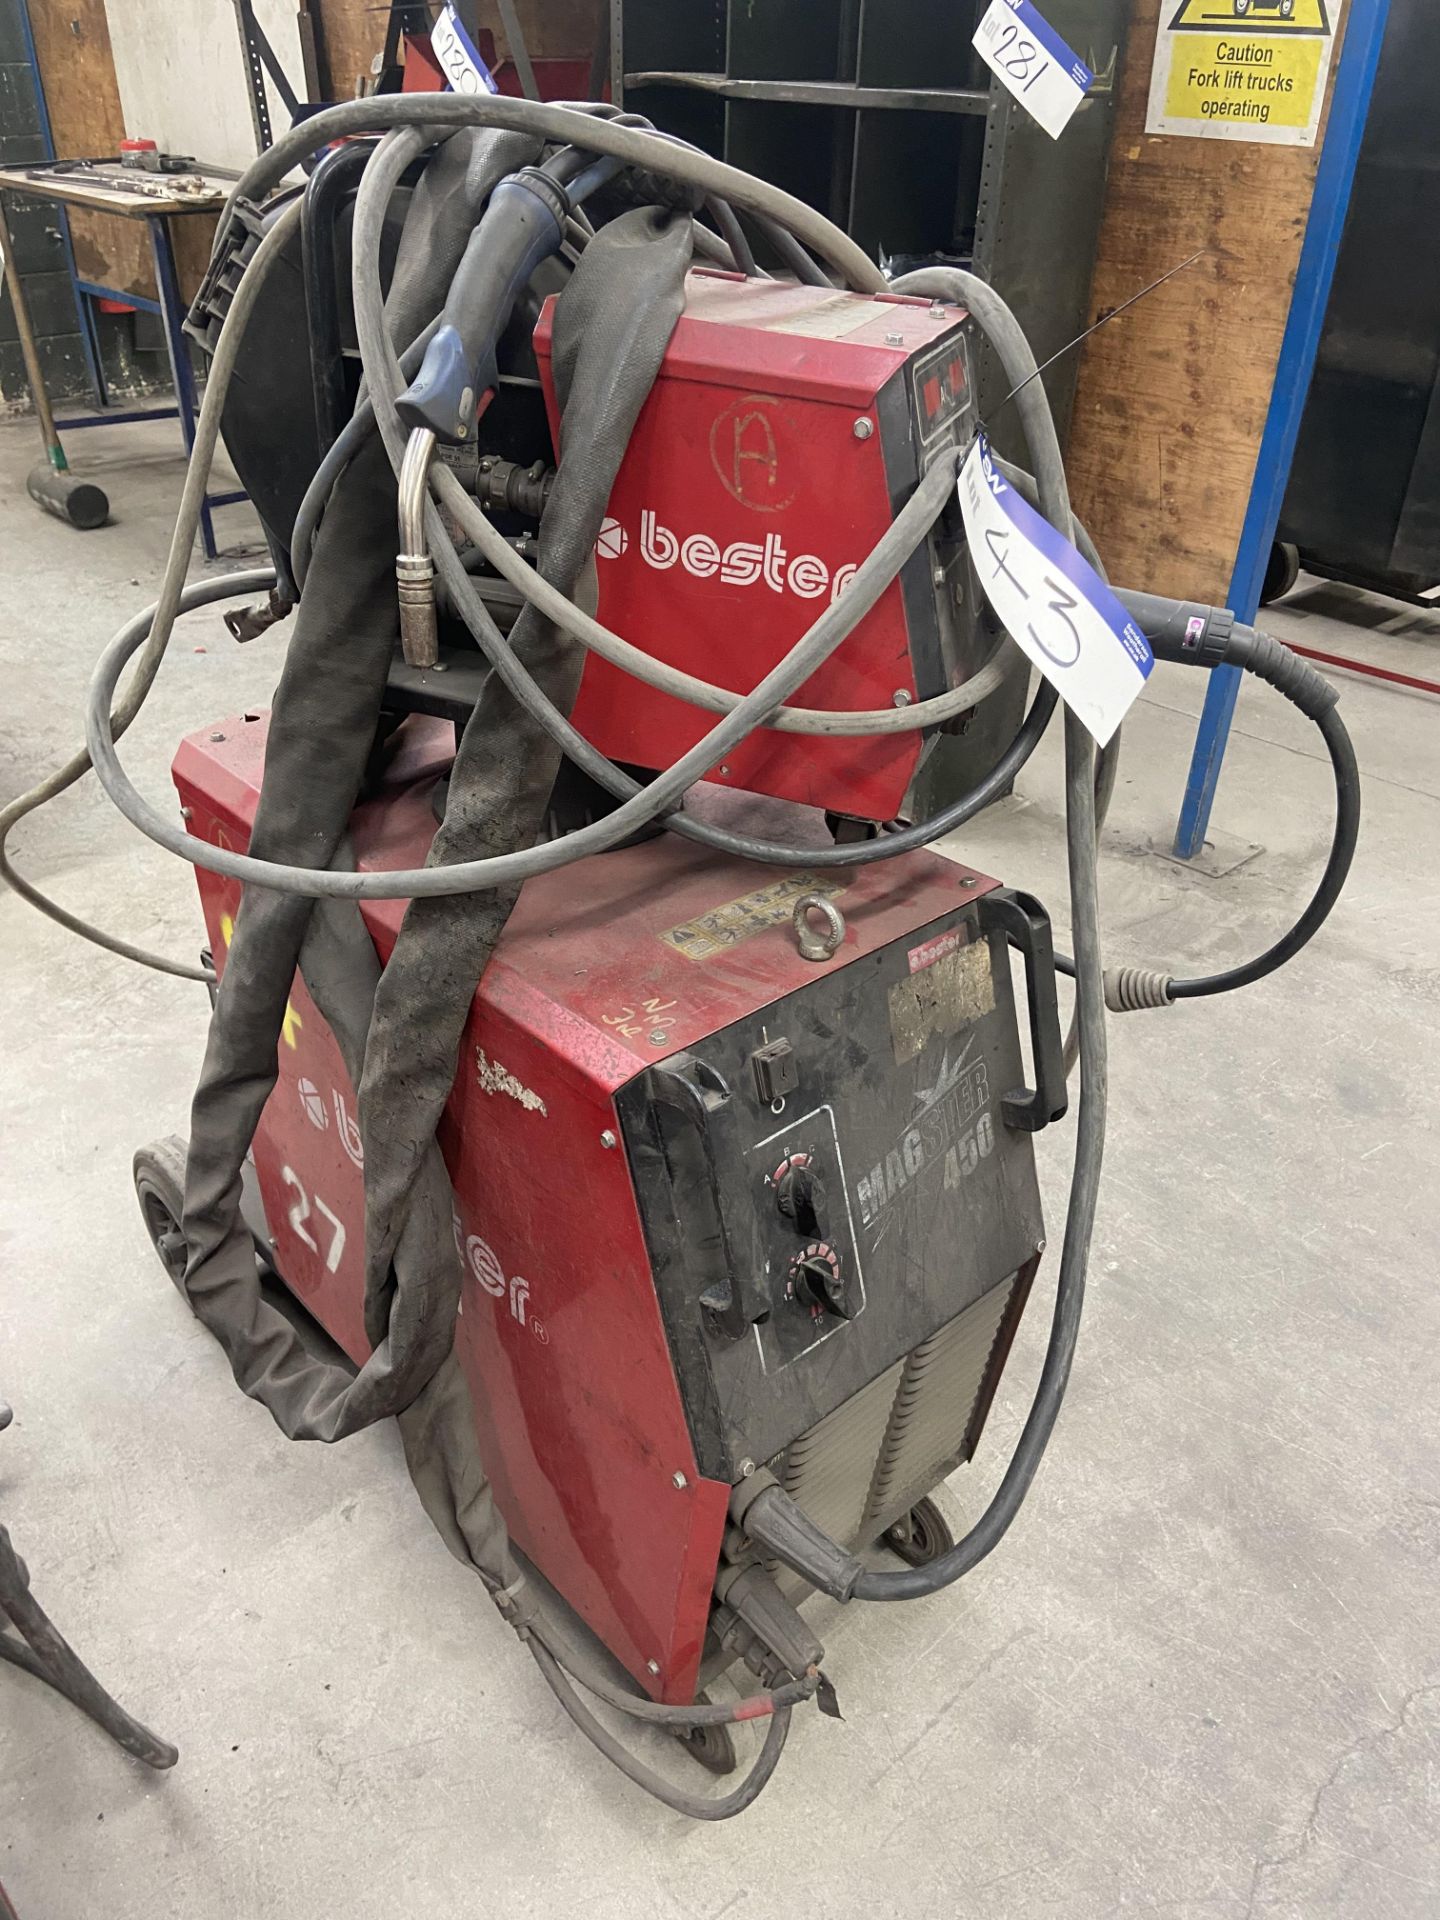 Bester Magster 450 Mig Welding Unit, serial no. P1090701226 Please read the following important - Image 2 of 4